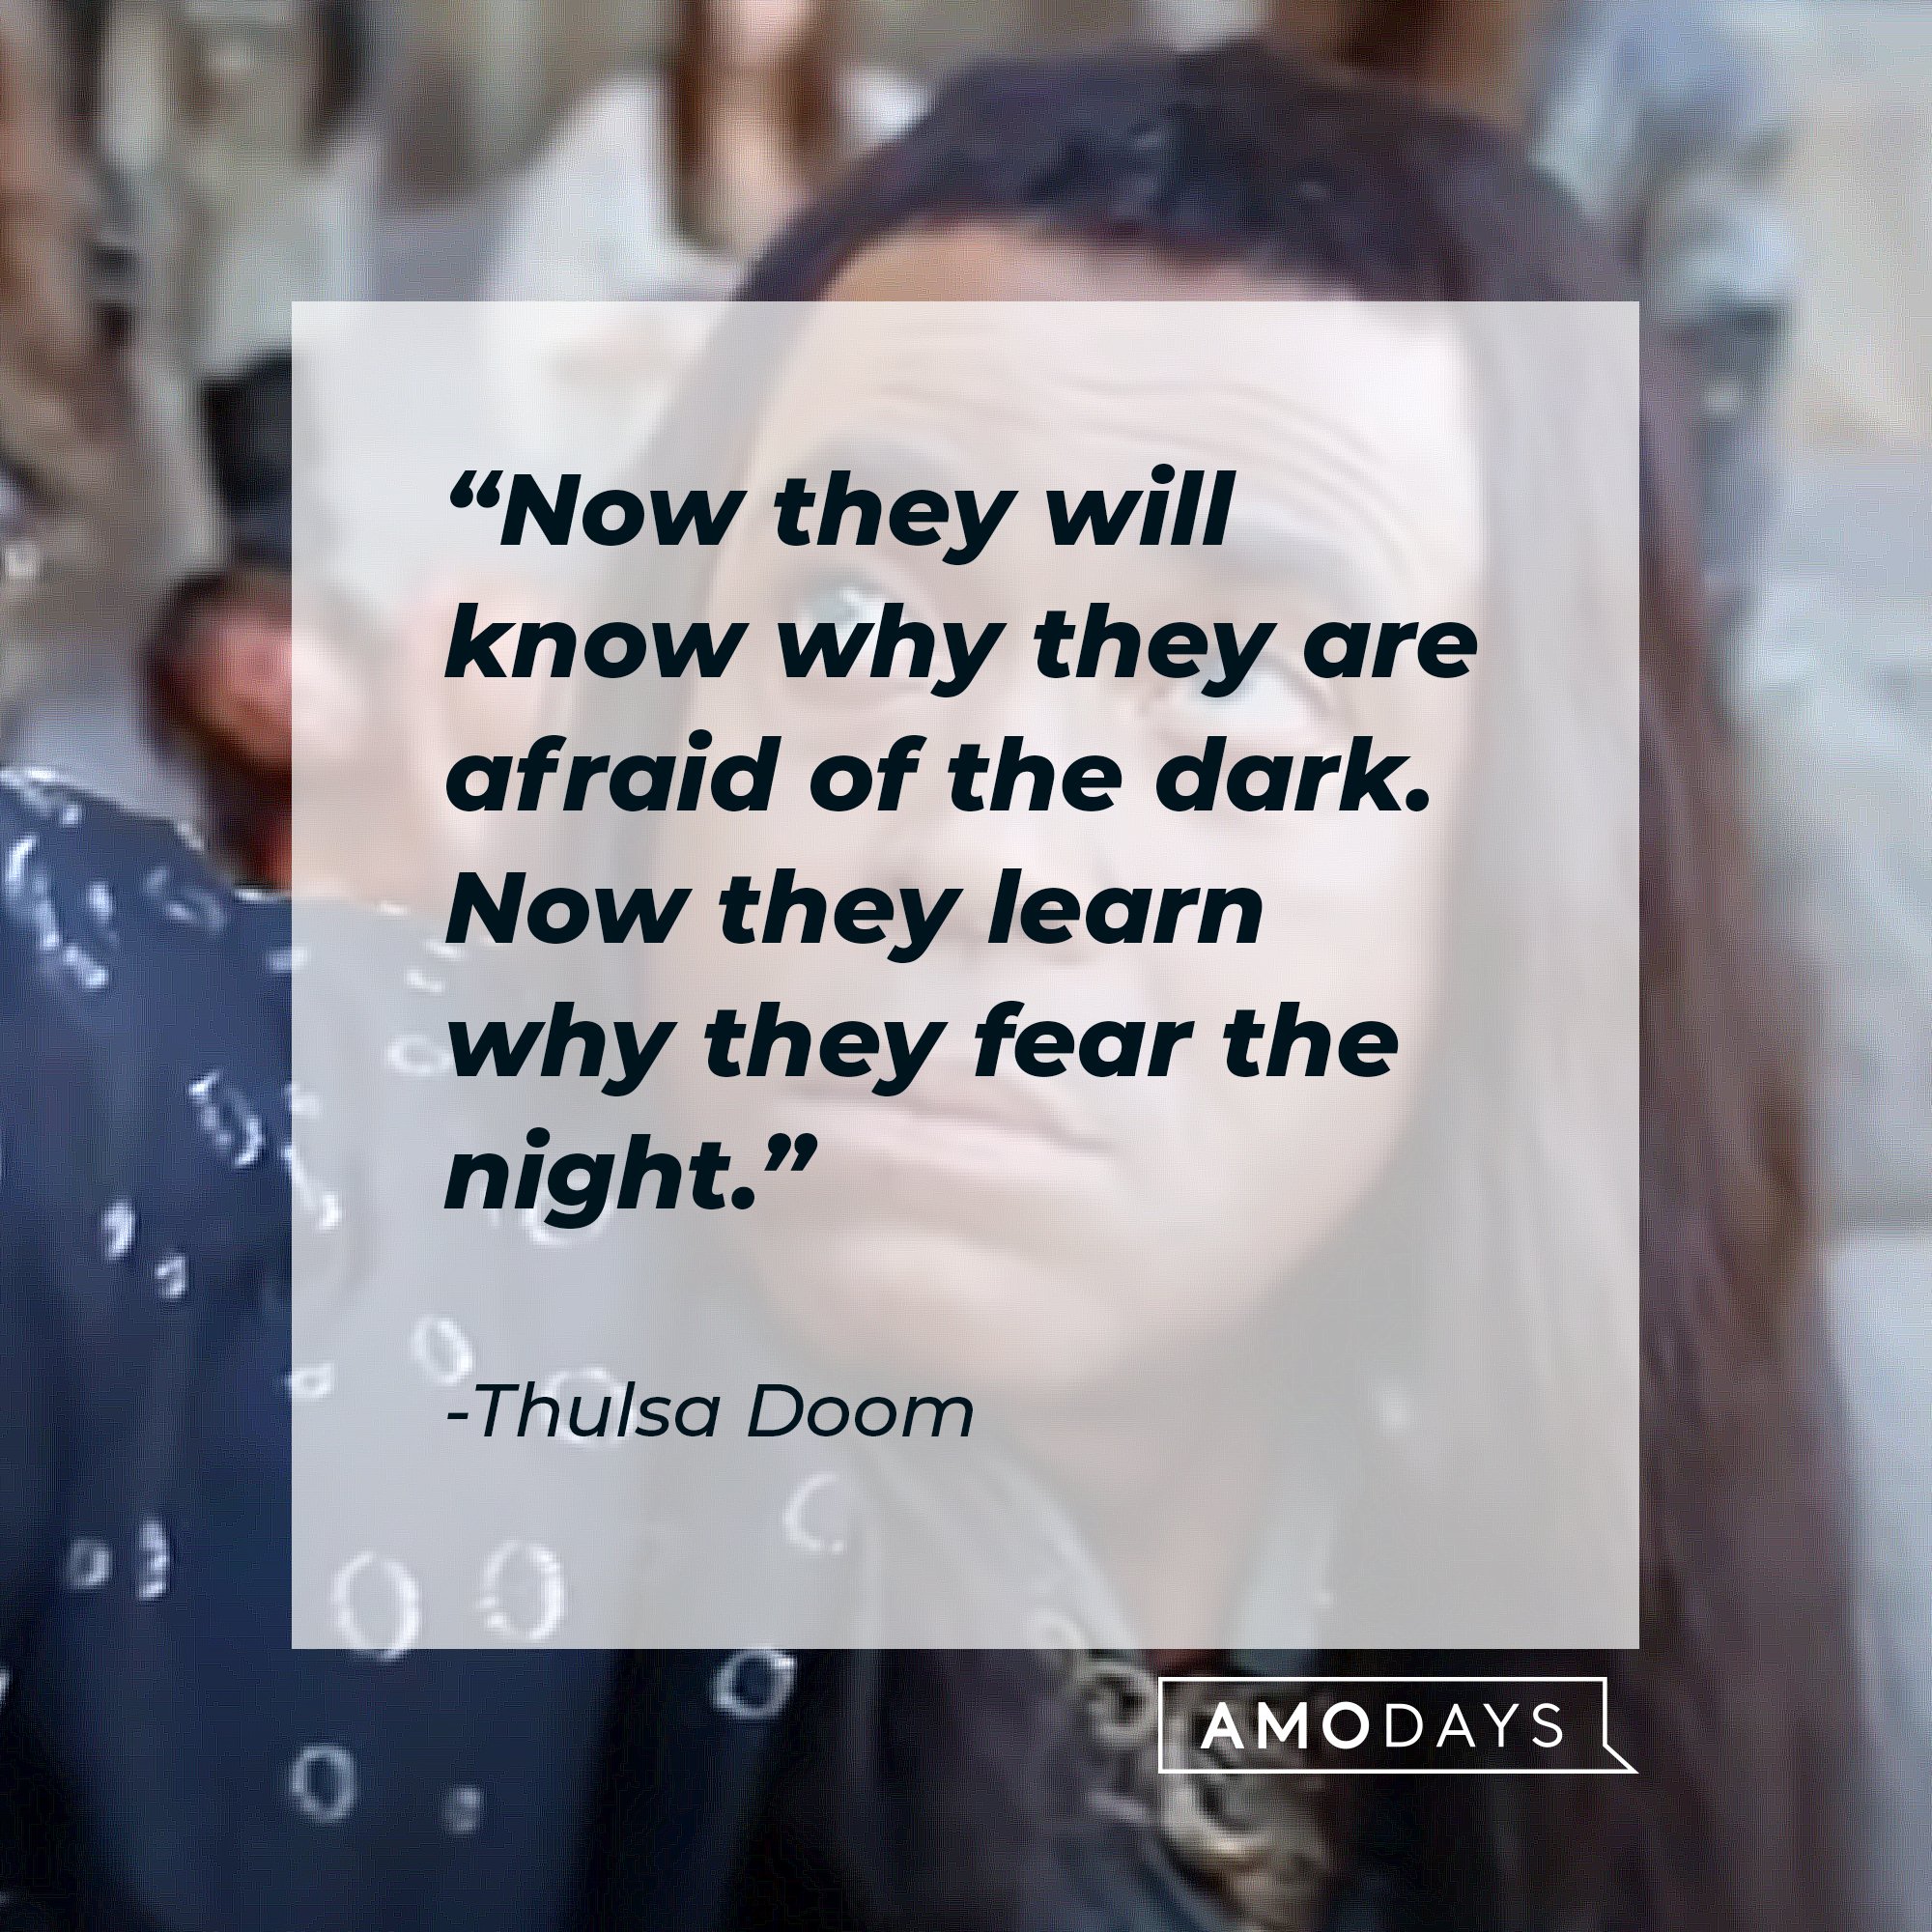 Thulsa Doom's quote: "Now they will know why they are afraid of the dark. Now they learn why they fear the night." | Image: AmoDays